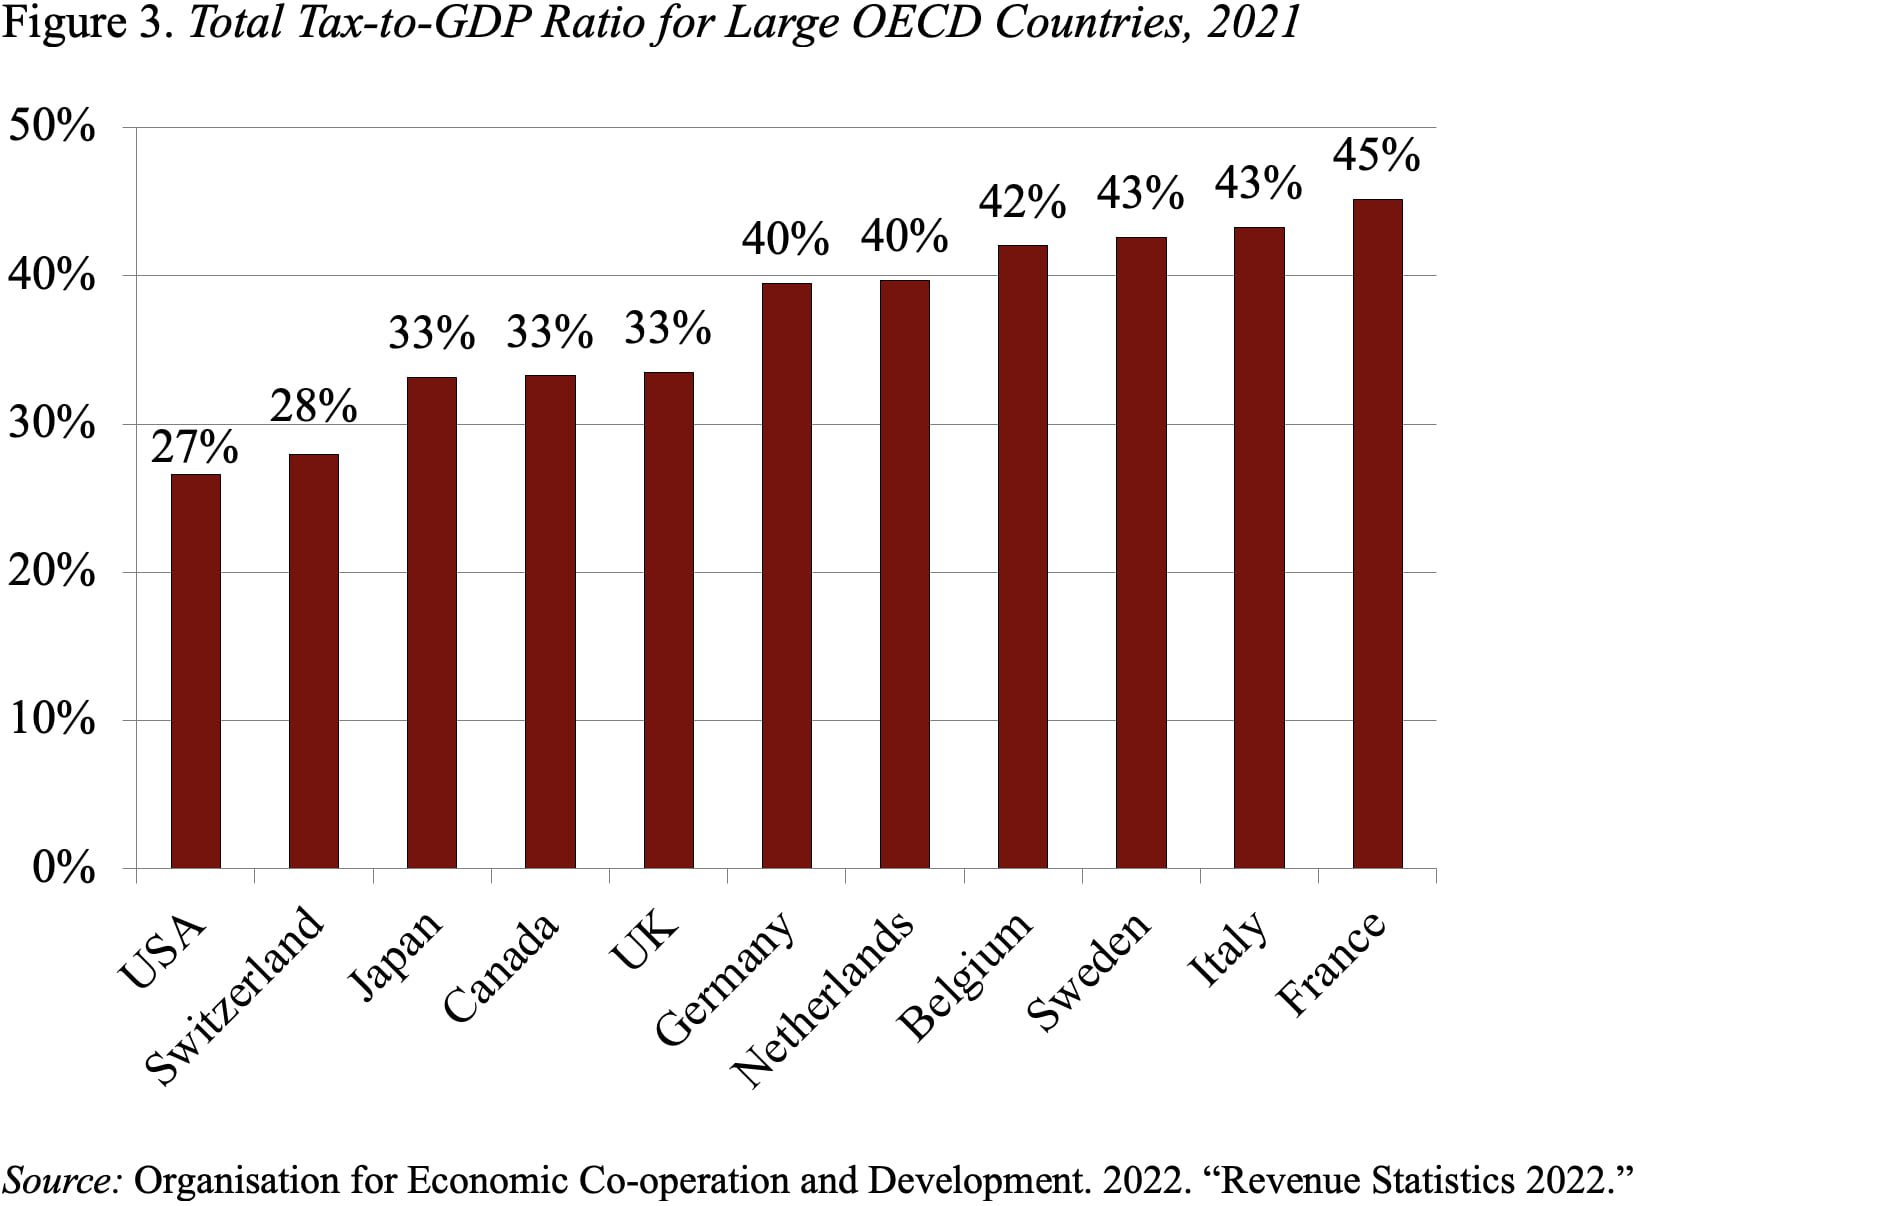 Bar graph showing the total tax-to-GDP ratio for large OECD countries, 2021